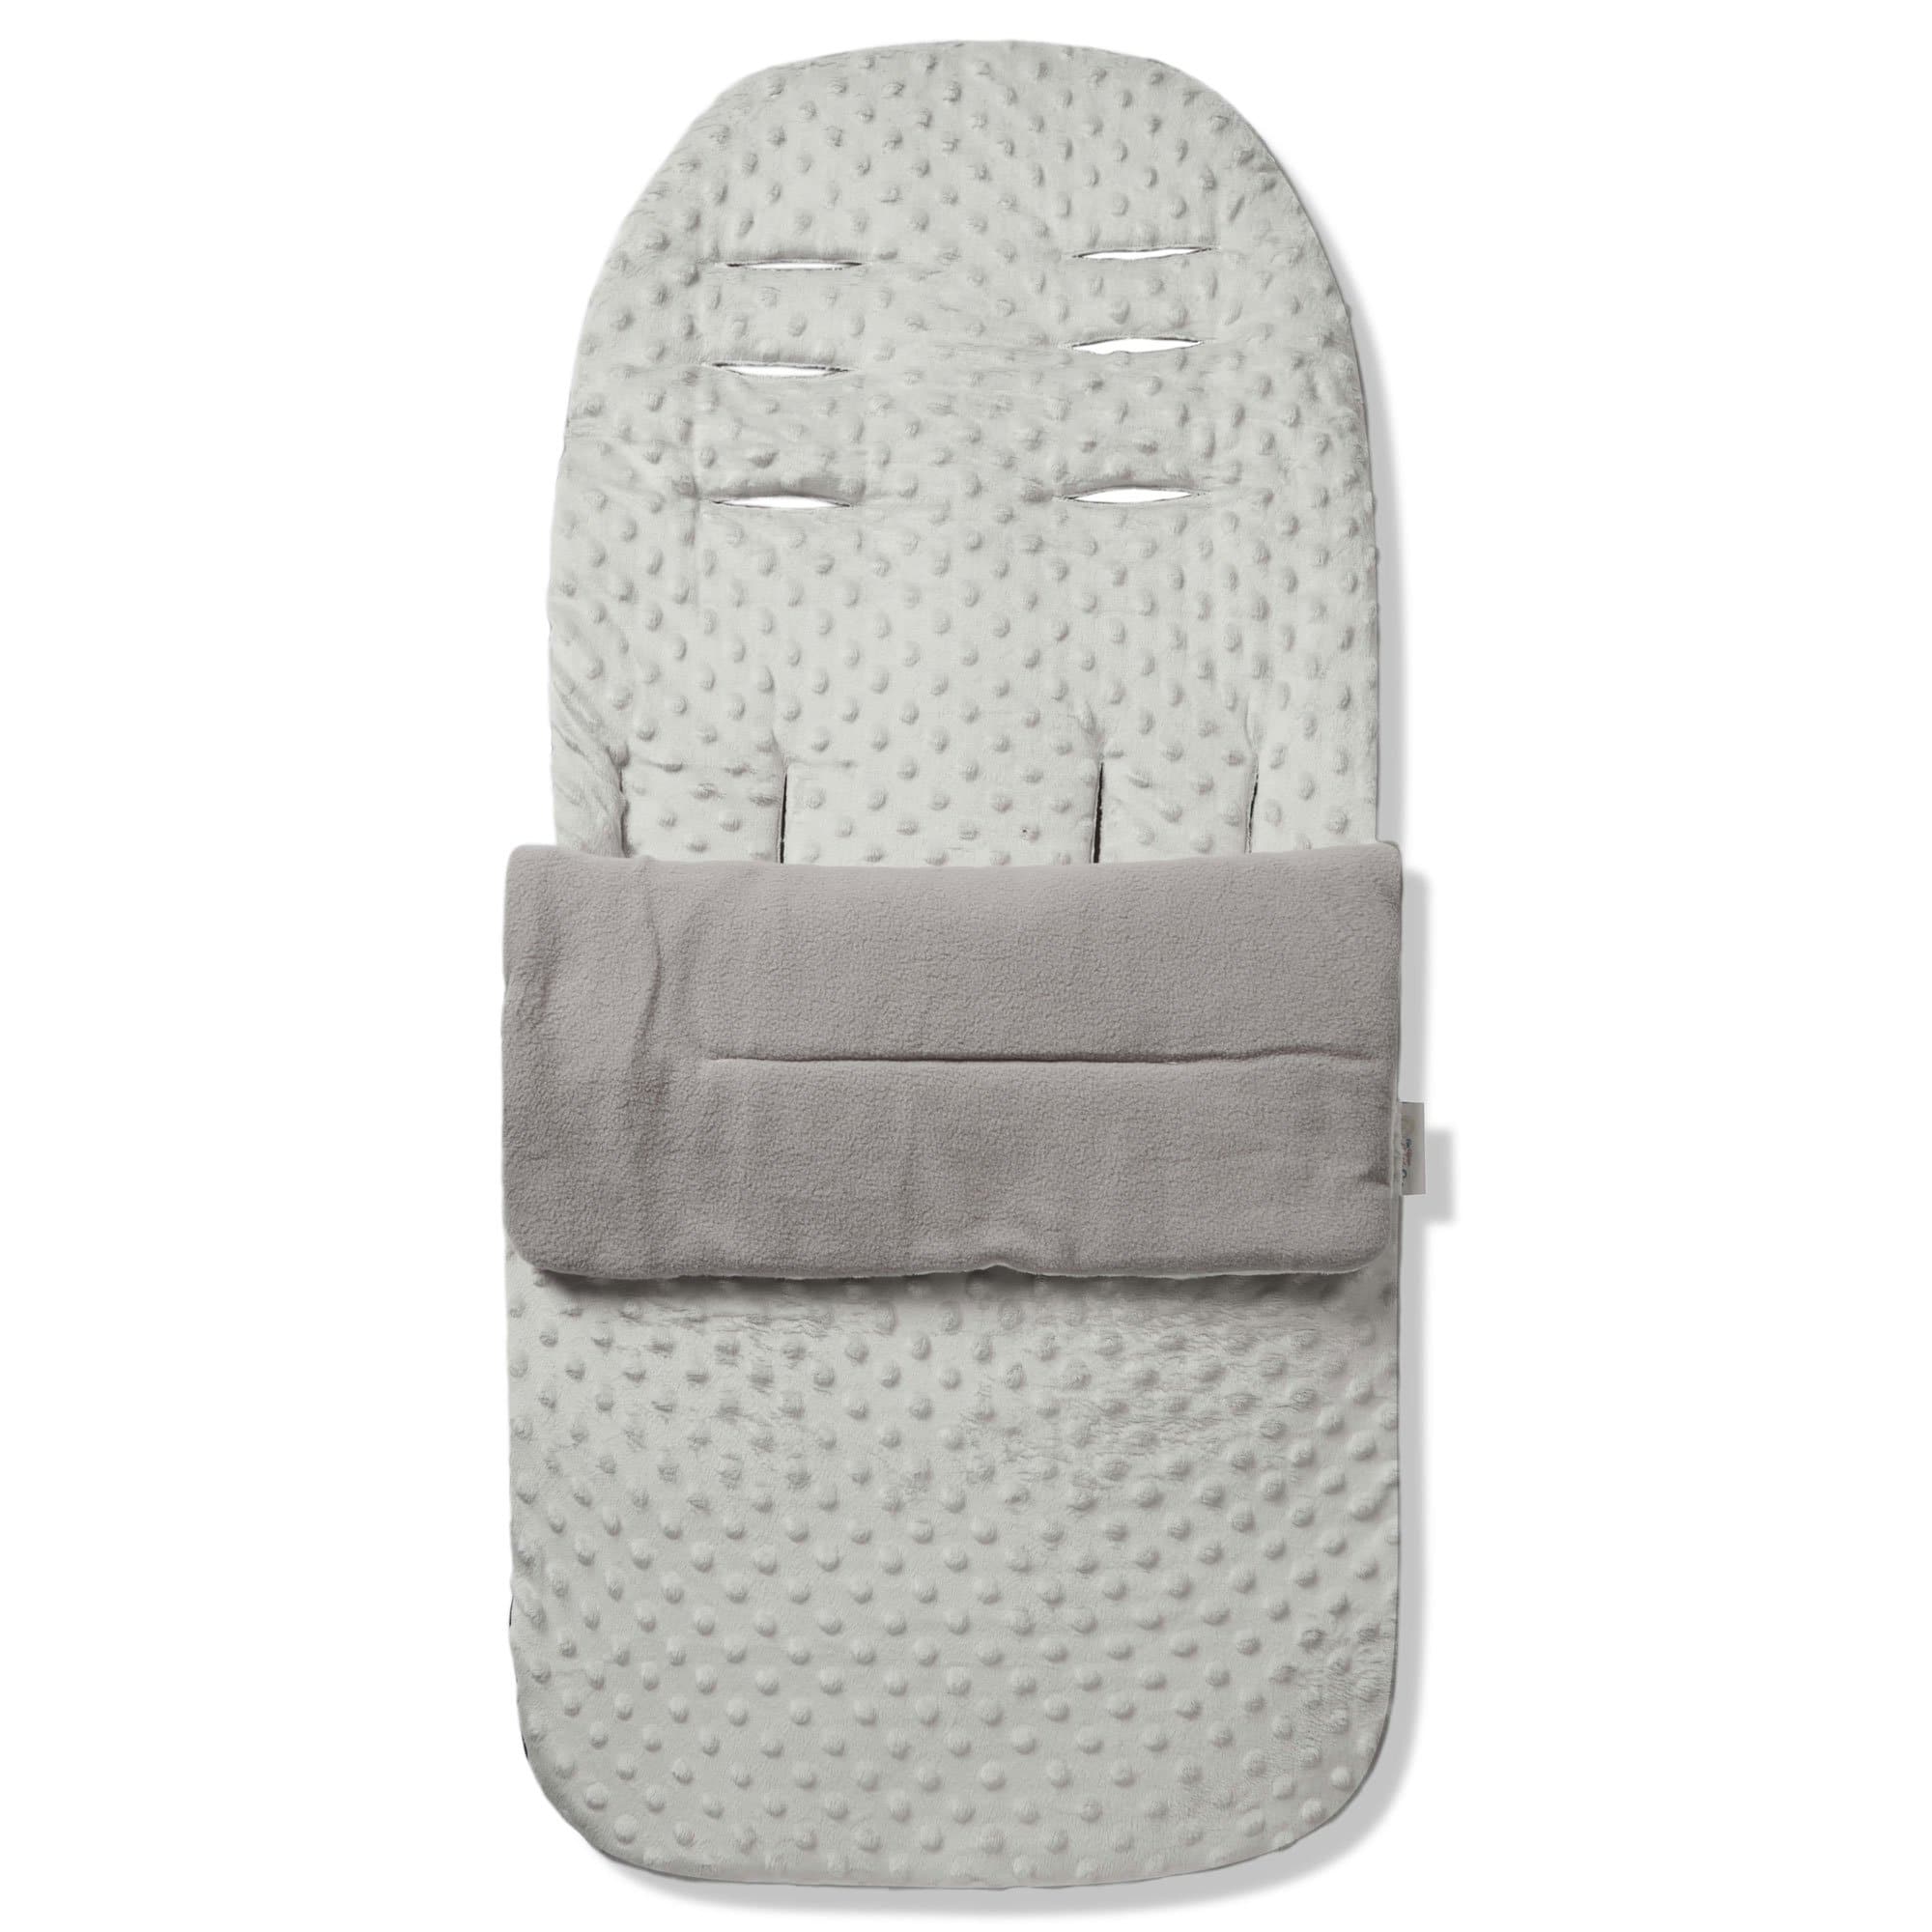 Dimple Footmuff / Cosy Toes Compatible with Baby Weavers - Grey / Fits All Models | For Your Little One